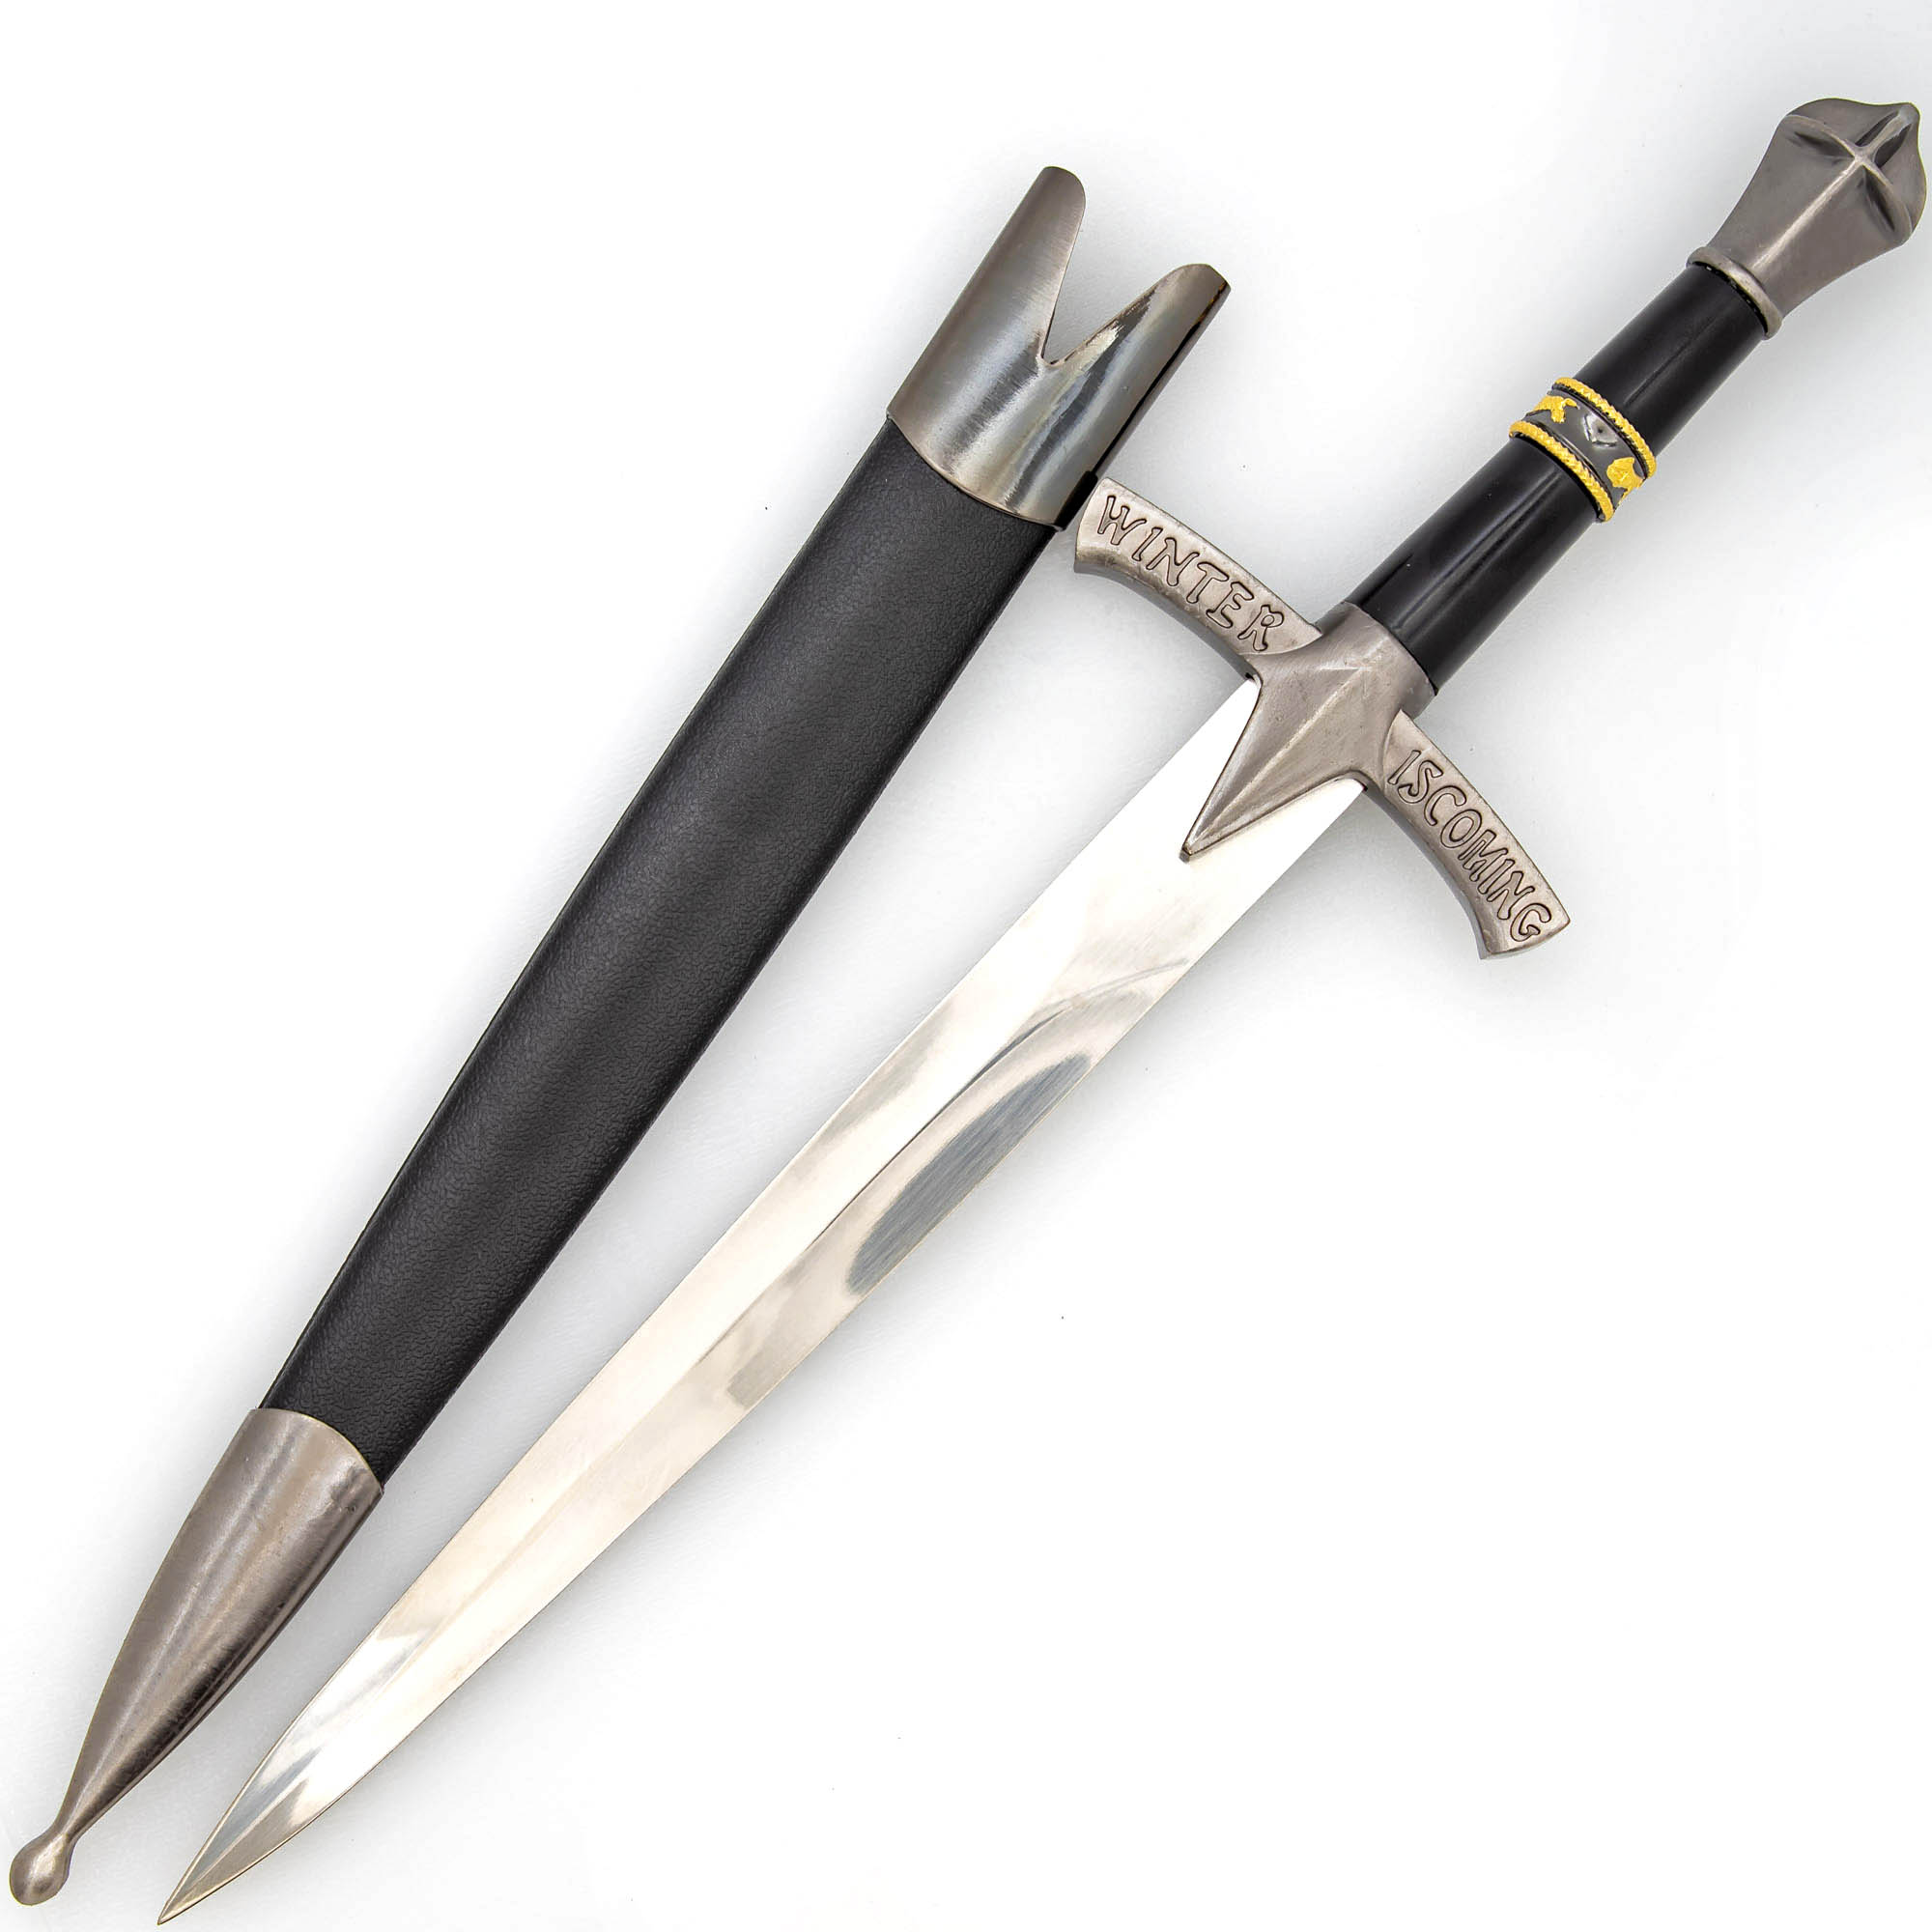 Chill Approaching Medieval Dagger Historical Reenactment Knightly Cosplay COSTUME Knife w/ Hard Scab